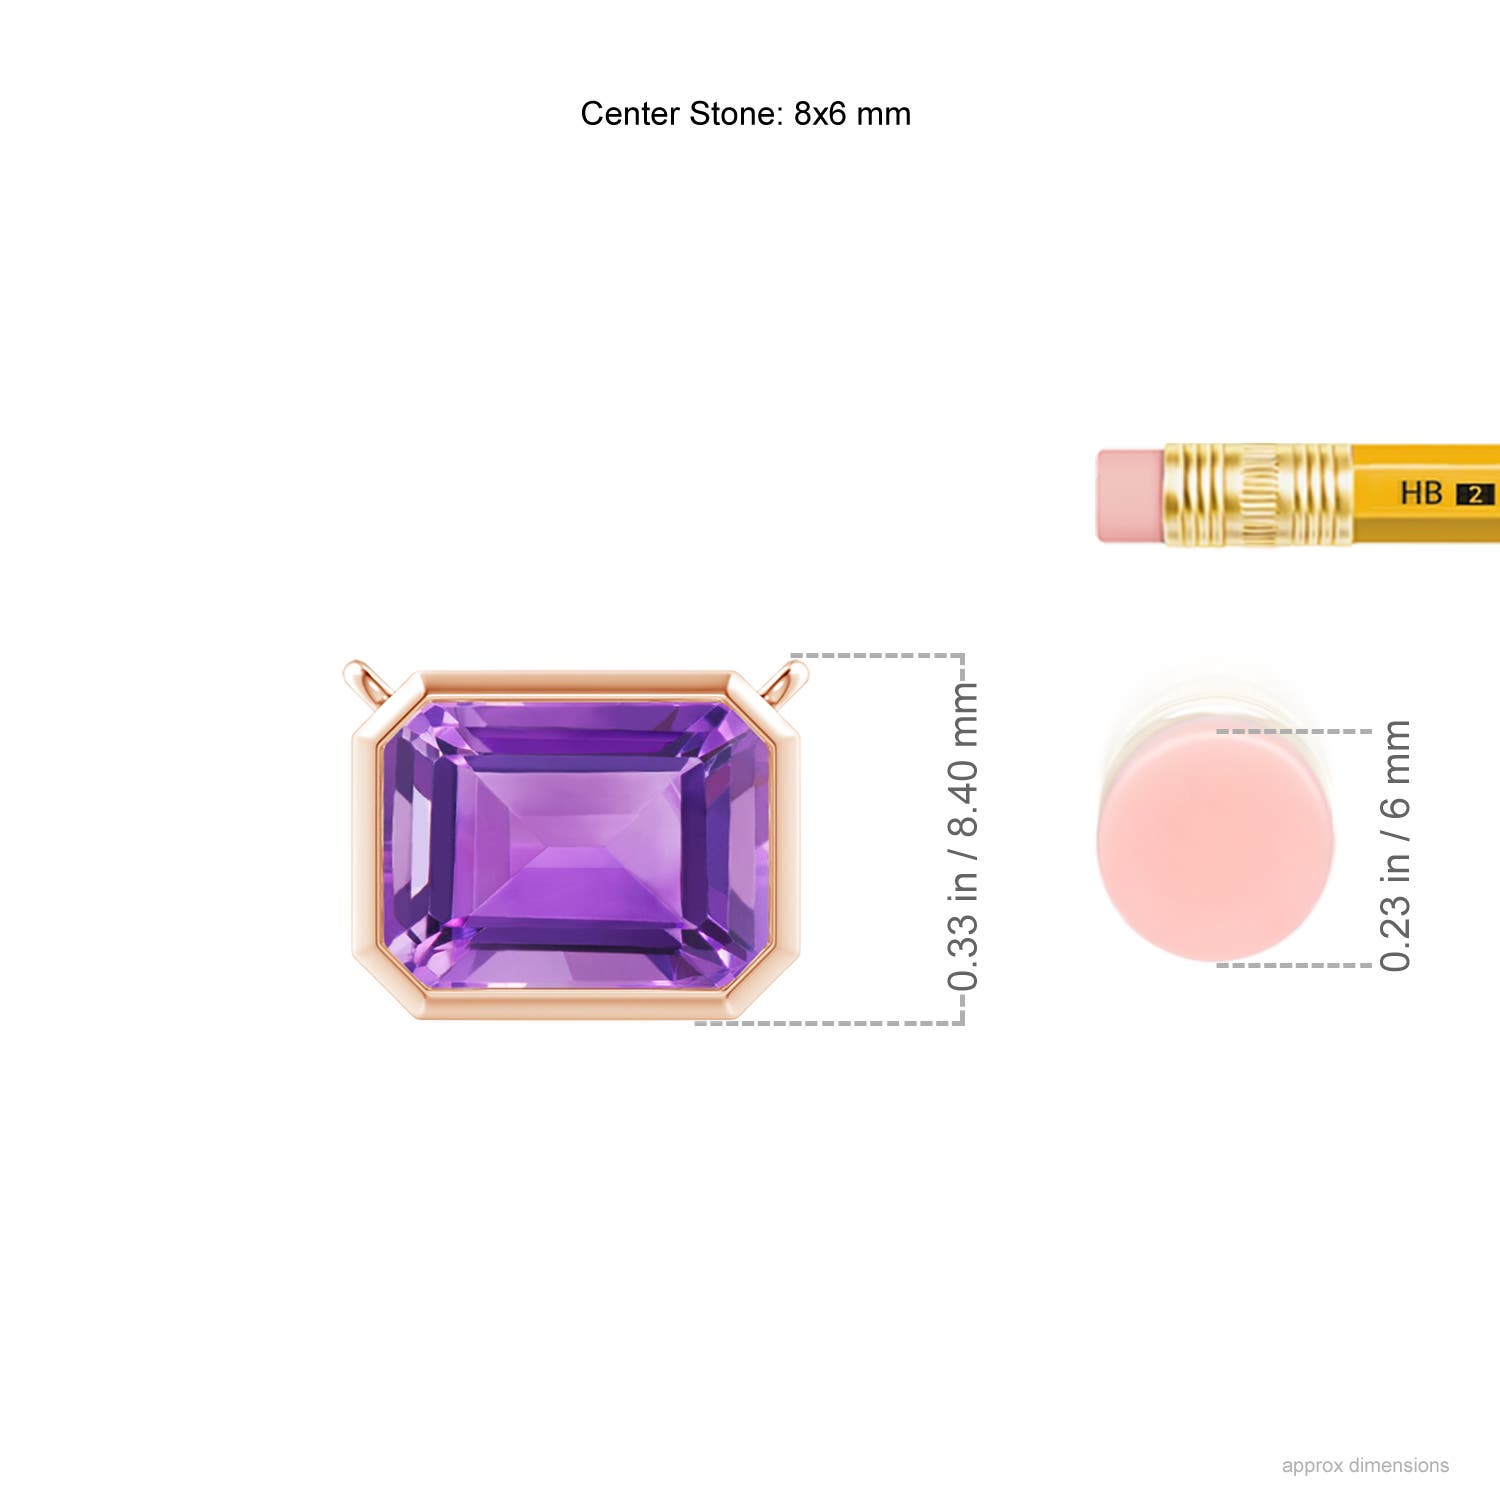 AA - Amethyst / 1.5 CT / 14 KT Rose Gold